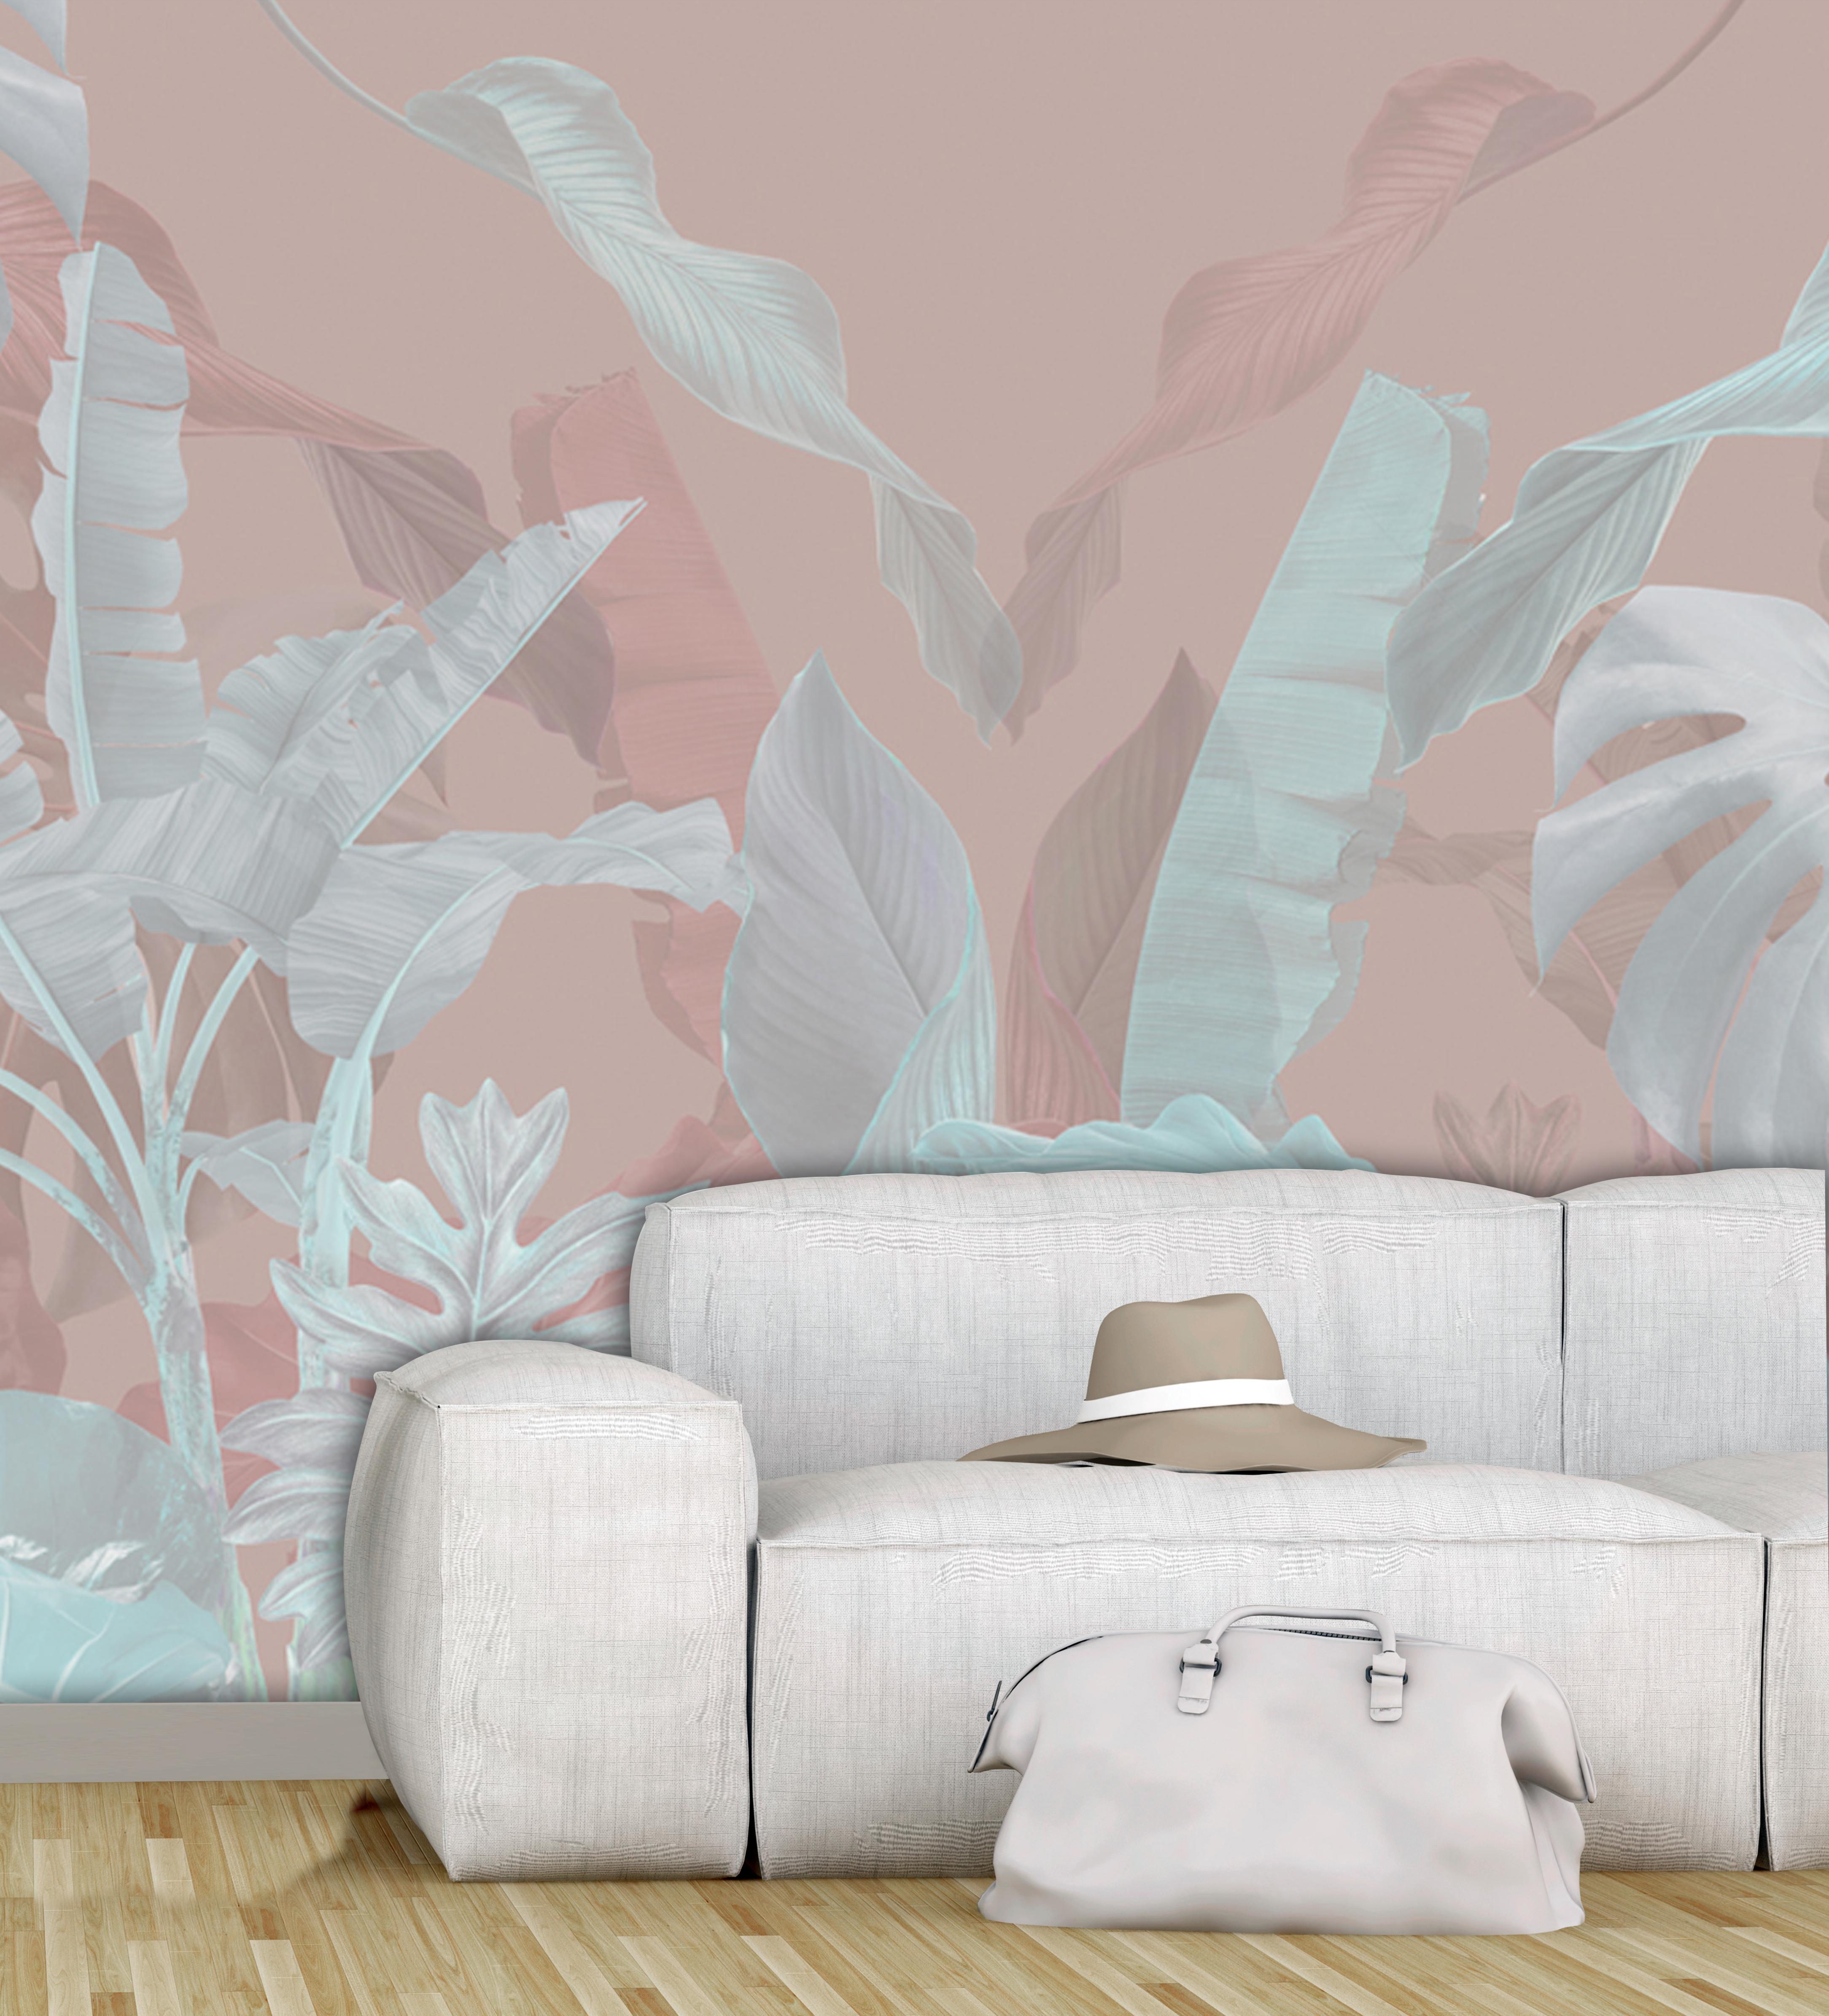 Introducing..... JungleScape by Edge Collections. 

A whimsical nod to endless Summers and the foliage of our chosen Miami home. JungleScape pays homage to the classic prints of yesteryear, while serving a tropical modernist flair. 

As light